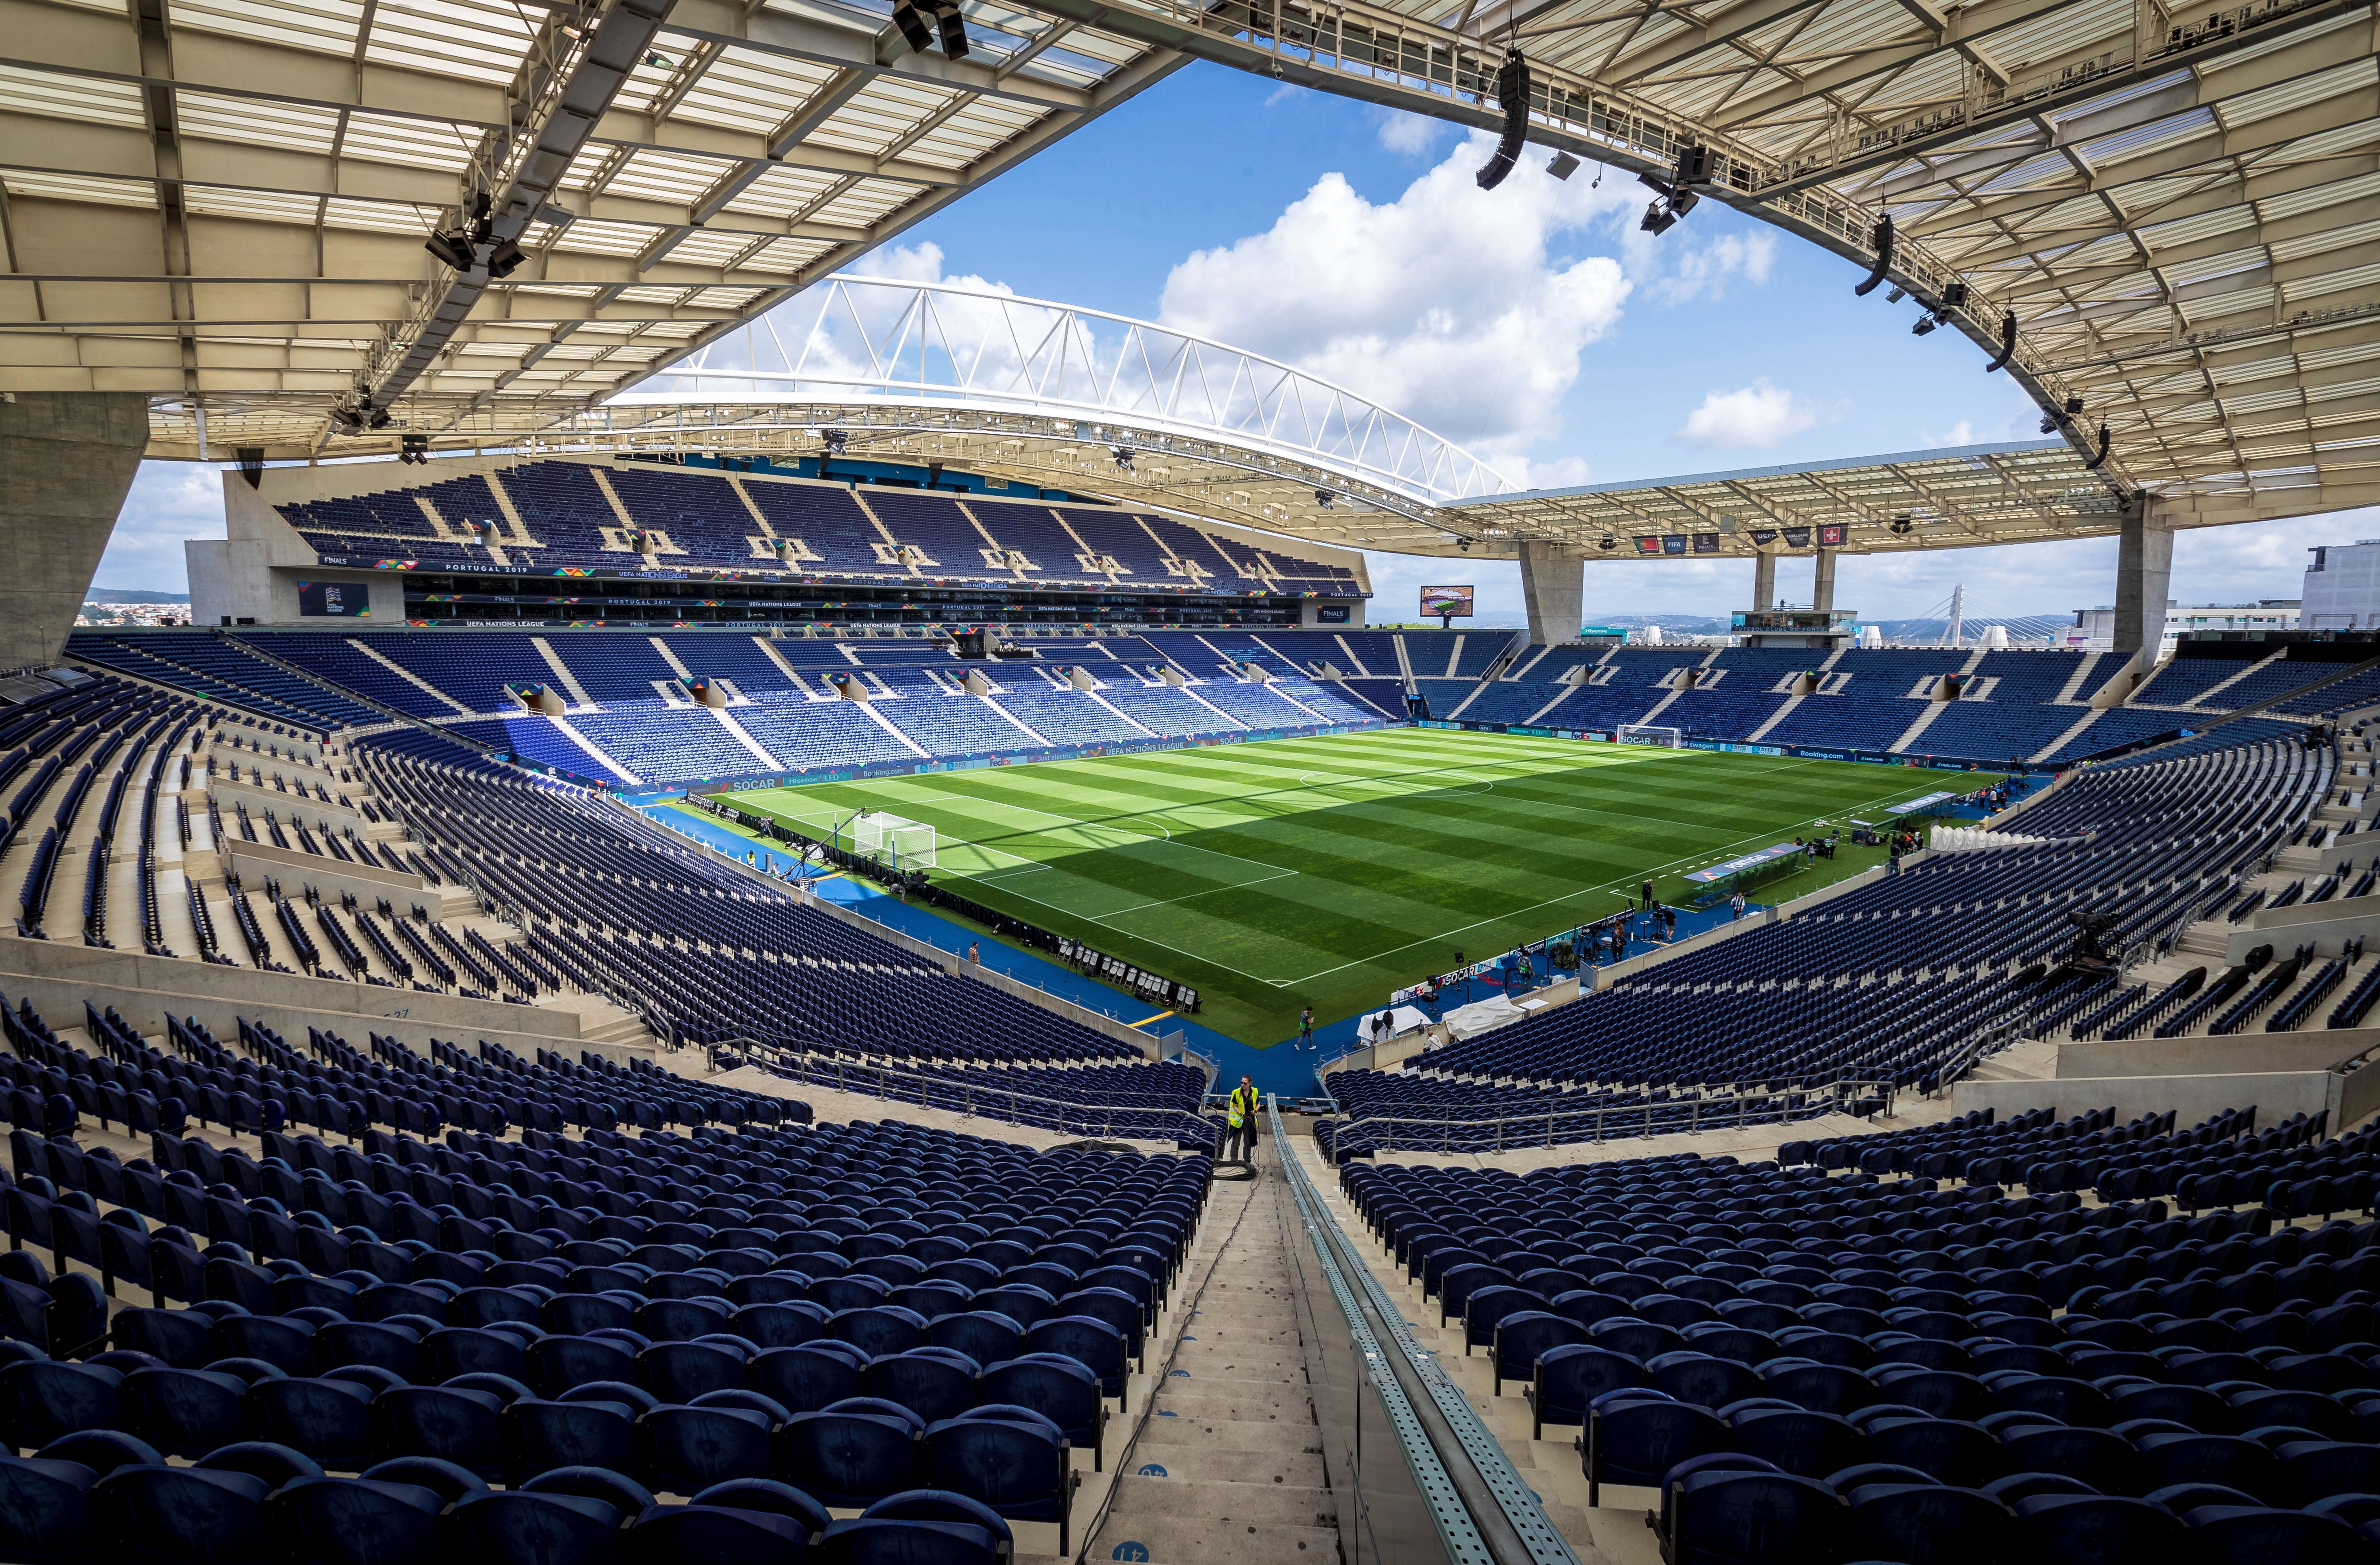 The safe capacity of the Estadio do Dragao will be decided by Portuguese authorities